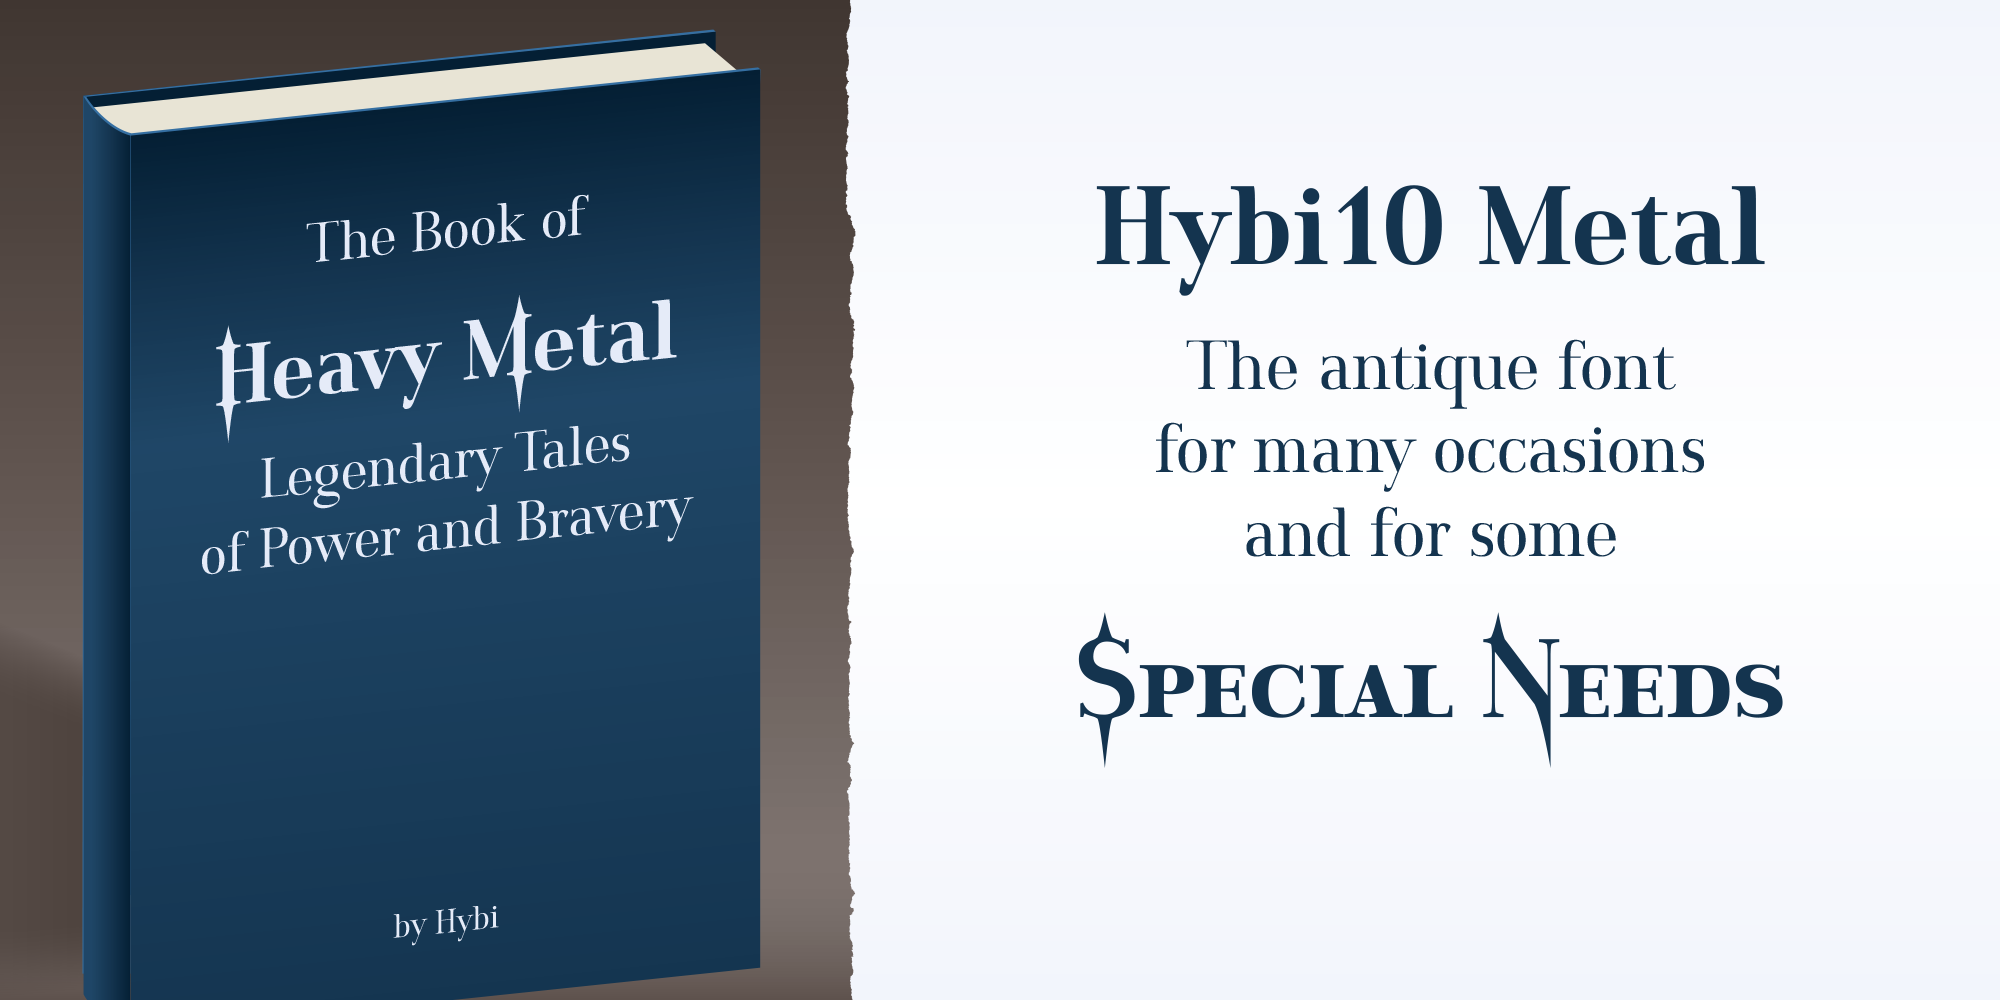 Hybi10-Metal – The antique font for many occasions and for some special needs